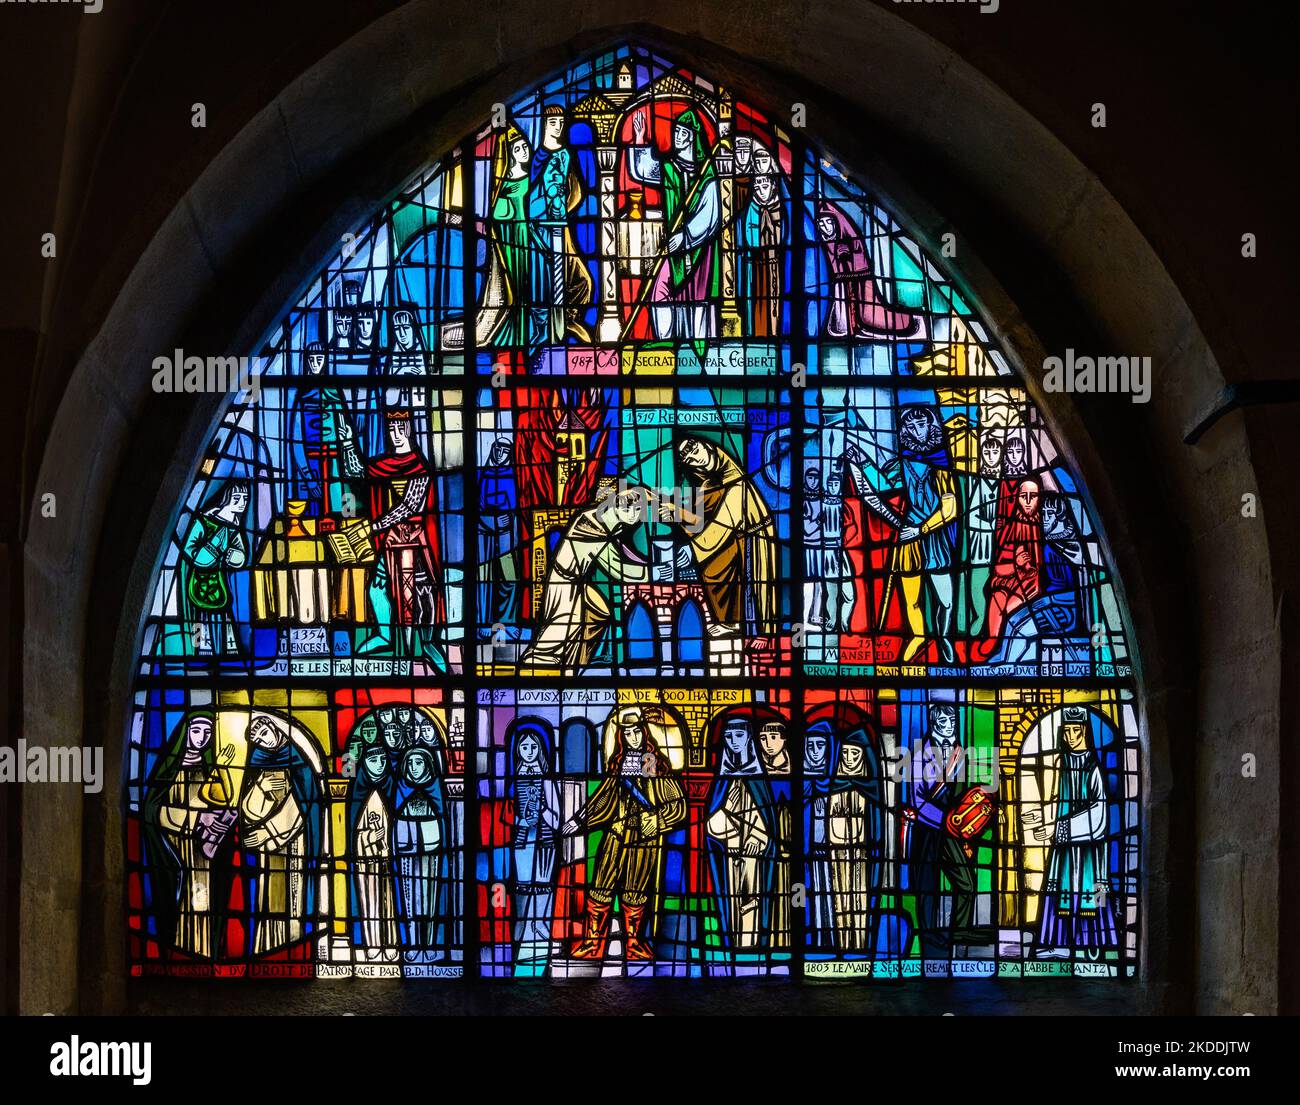 Stained-glass window In Église St. Michel (St. Michael's Church) depicting the history of St Michel's Church. Luxembourg City, Luxembourg. Stock Photo